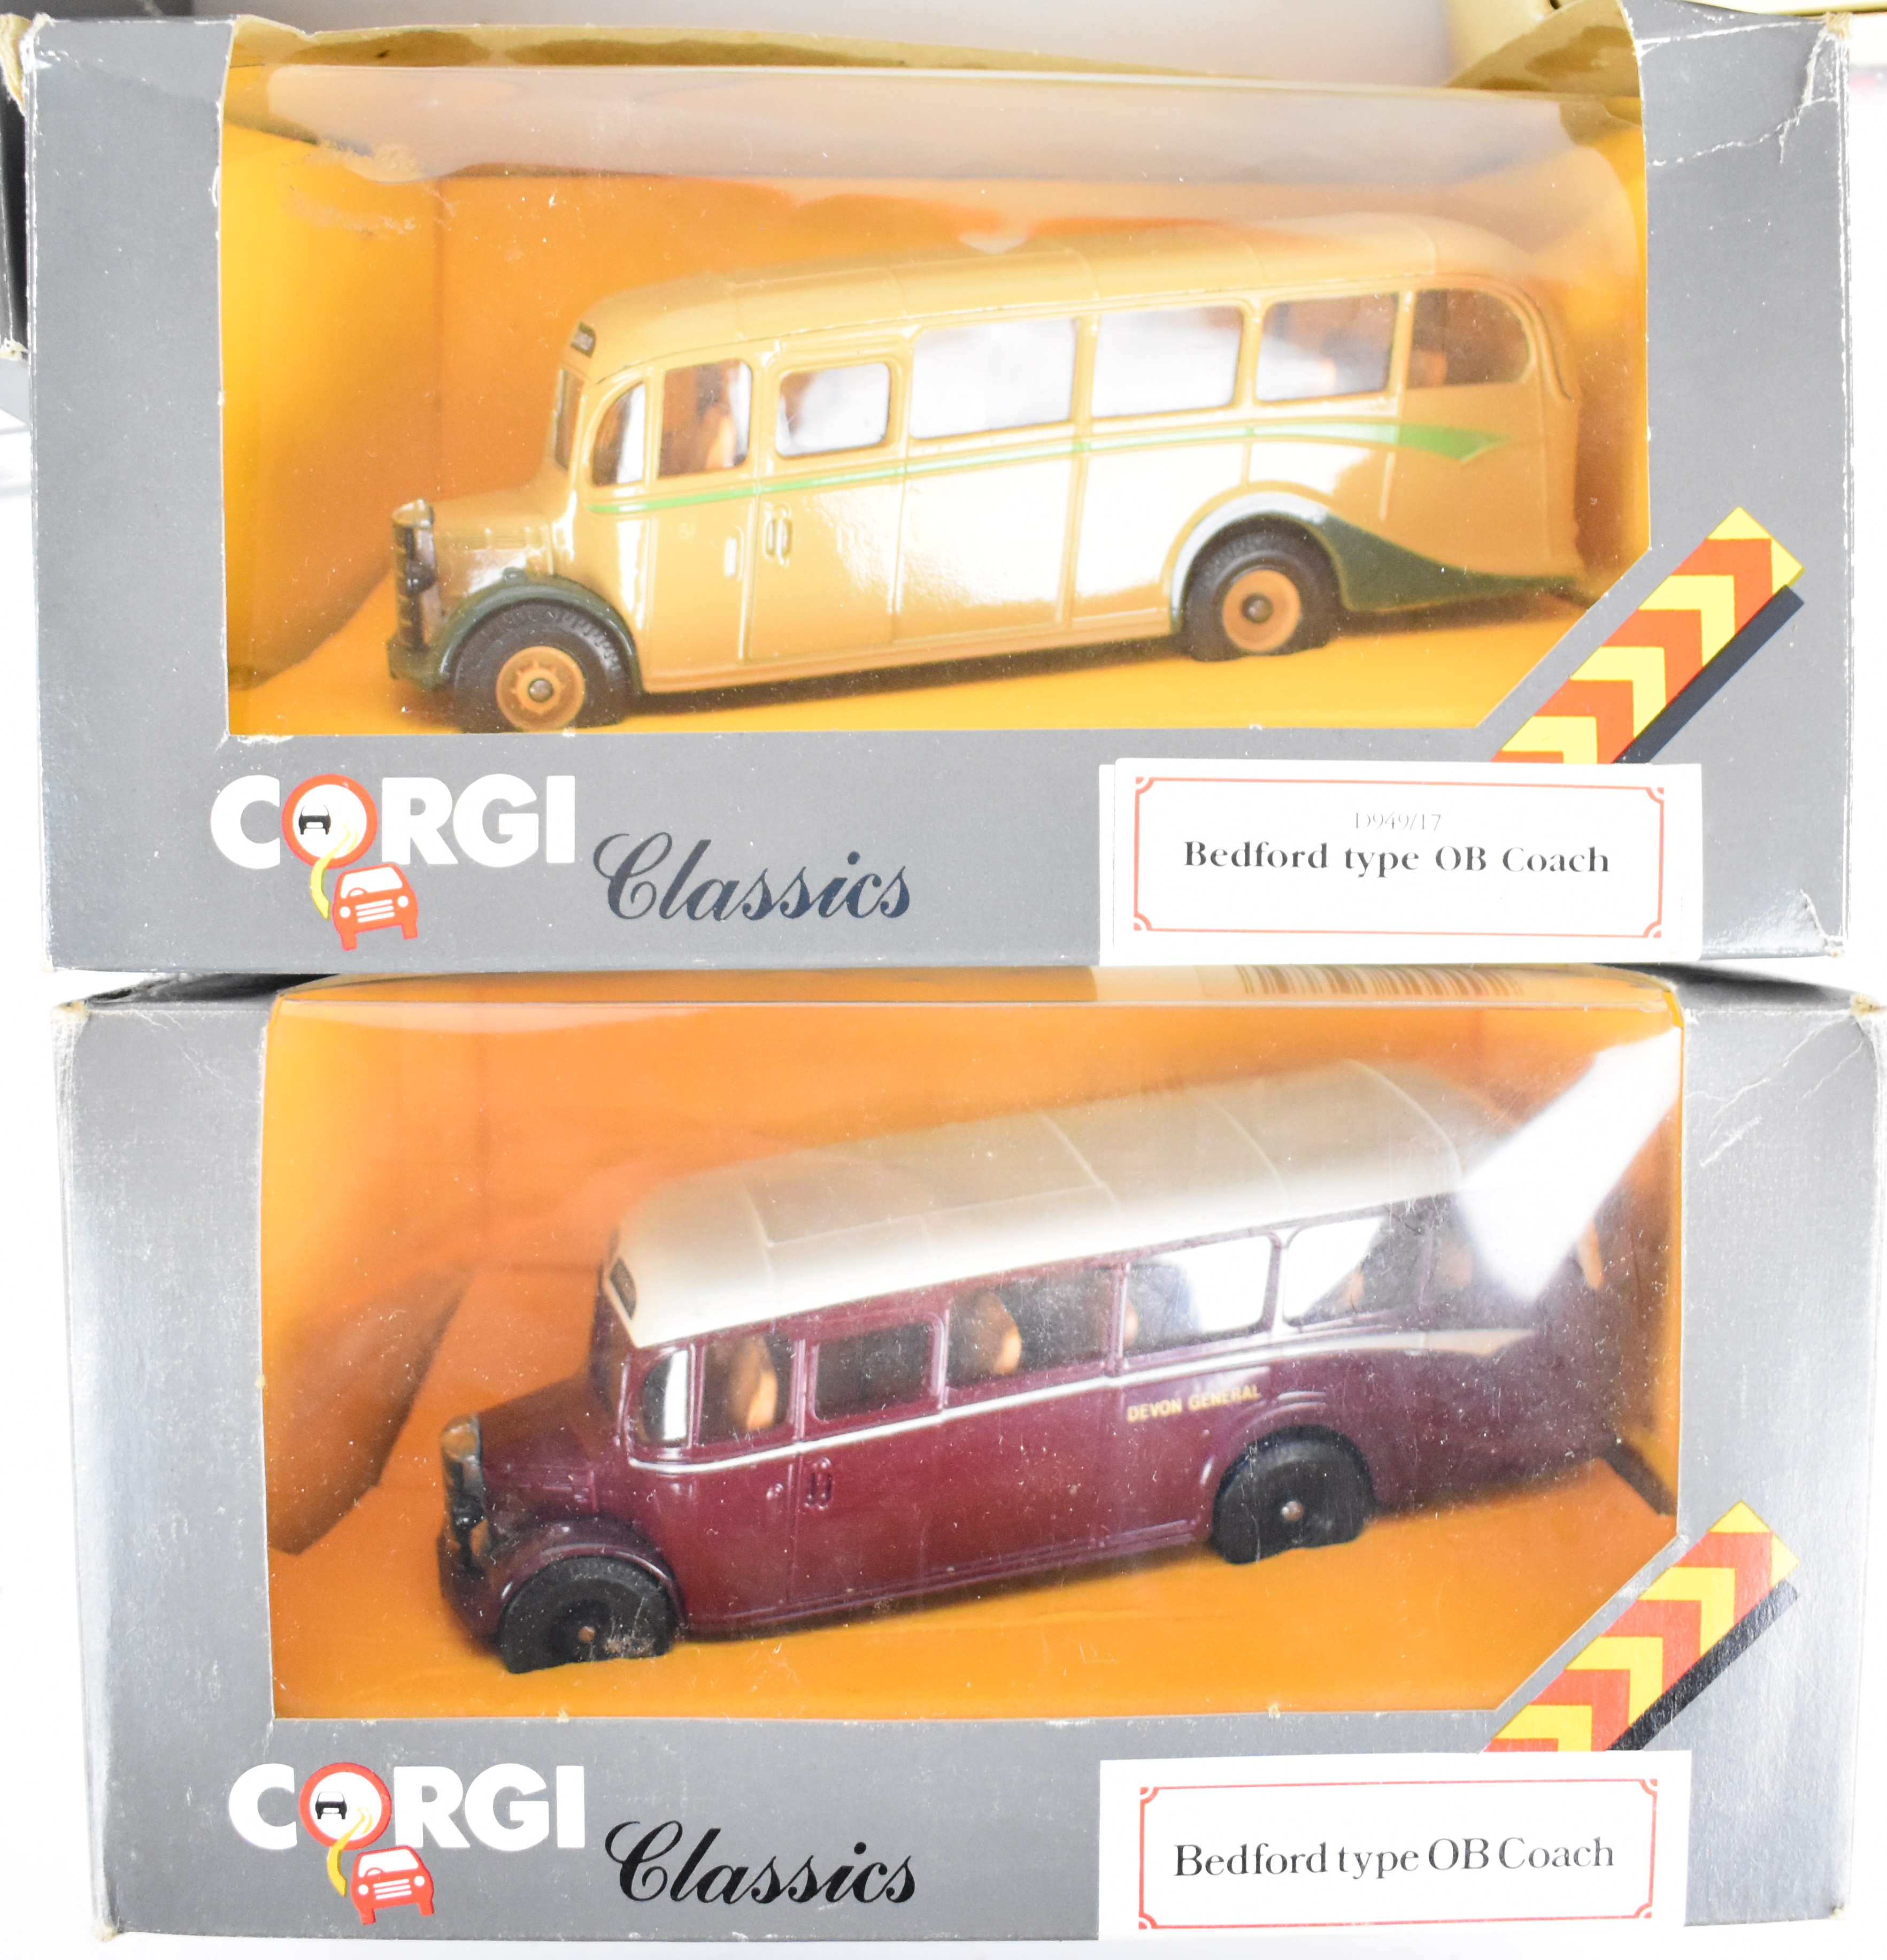 Eleven diecast model buses by Corgi, Exclusive First Editions (EFE) and The Original Omnibus - Image 5 of 5